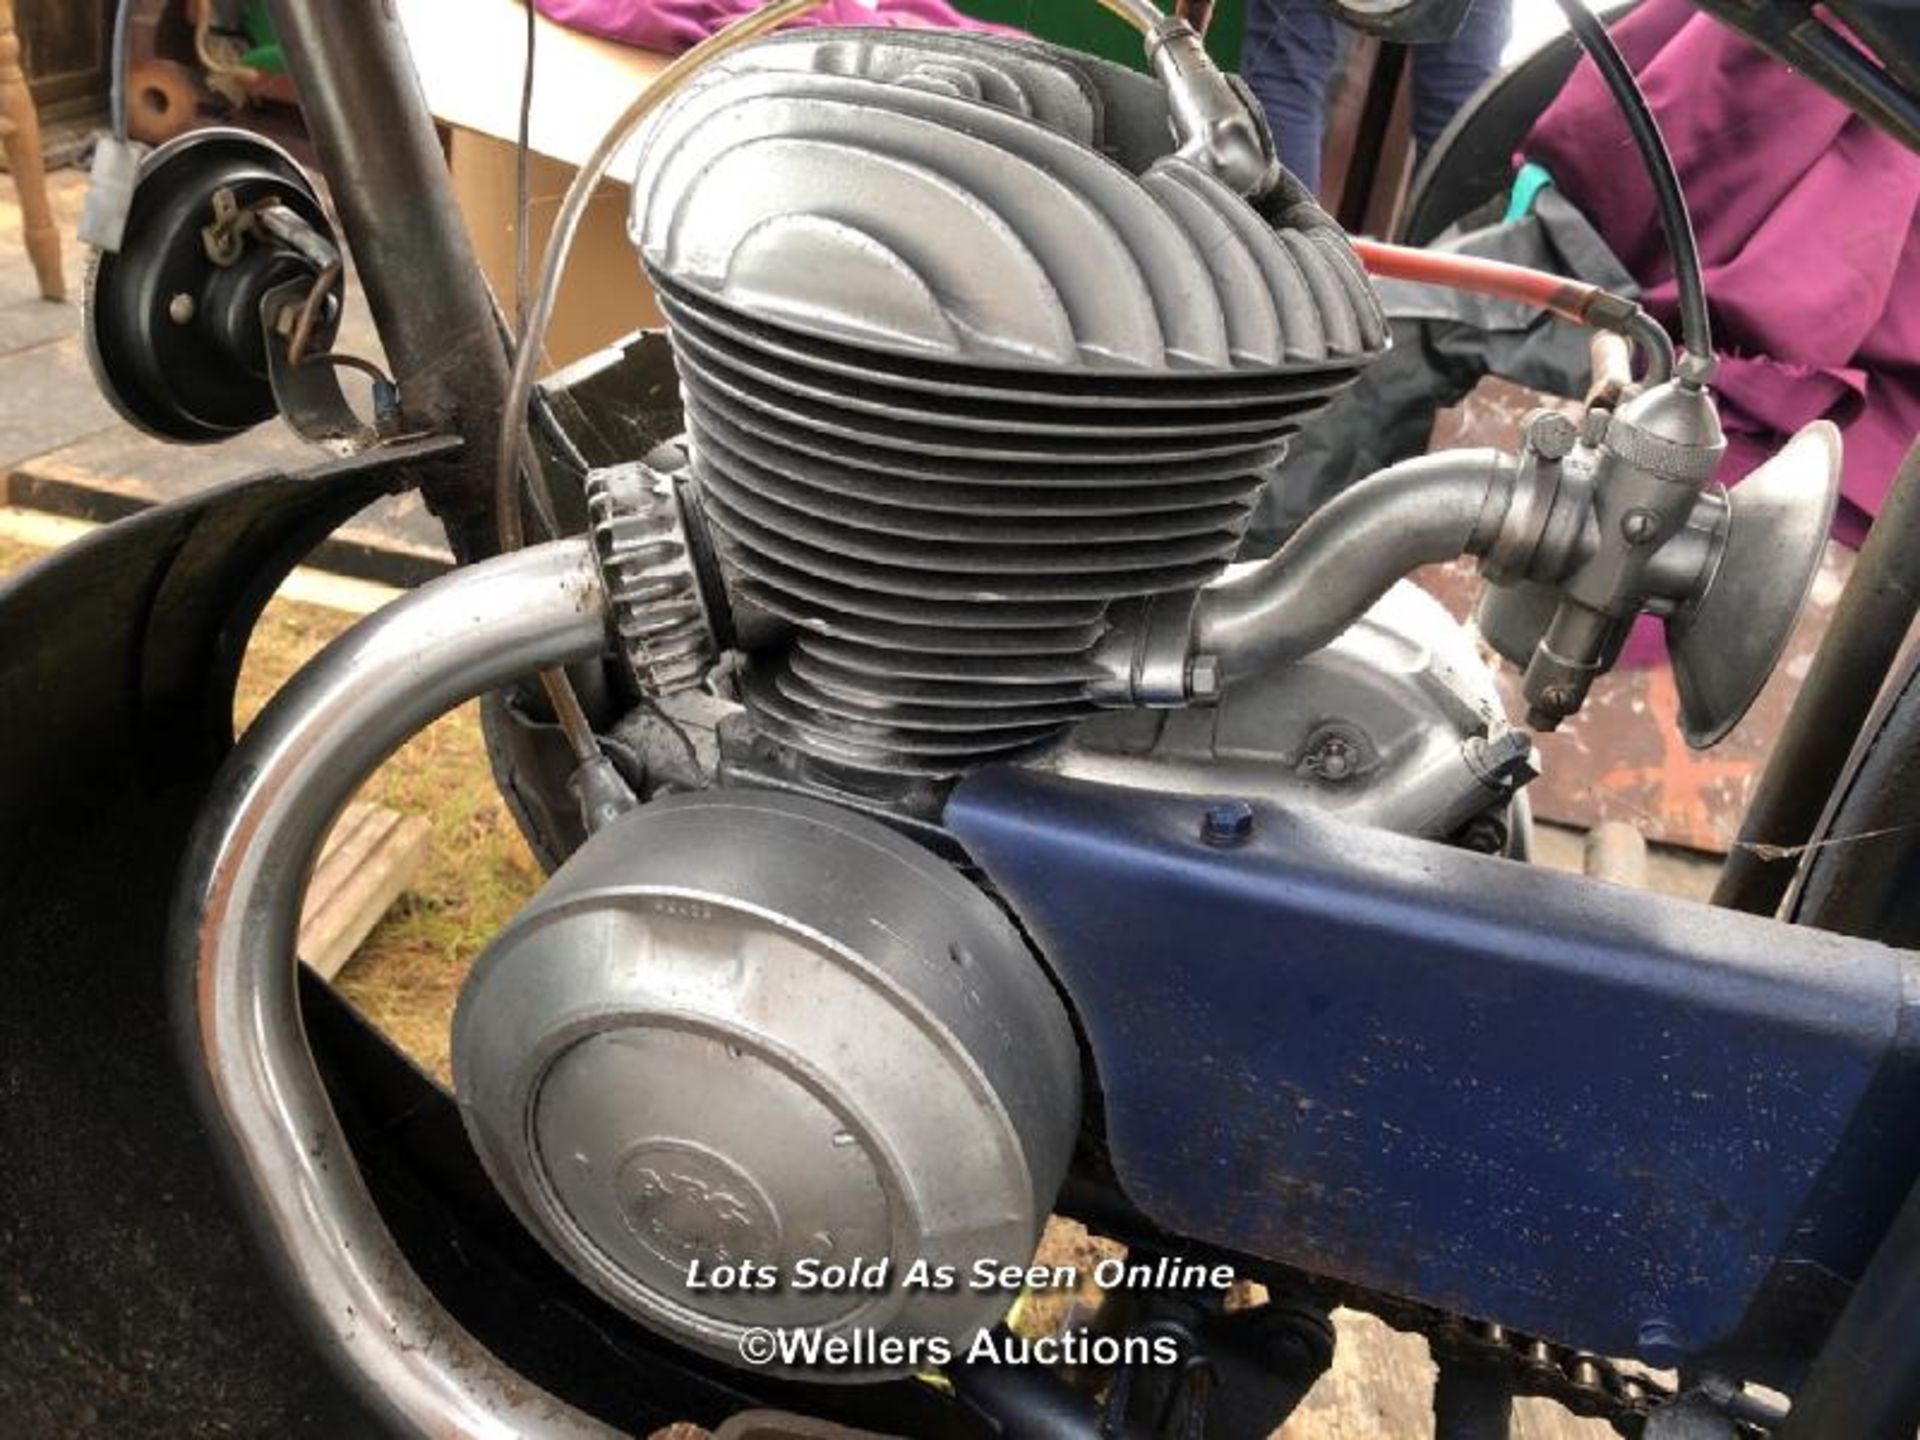 PEUGEOT 125 1955 MOTORCYCLE, FOR RESTORATION - This lot is located away from the auction site, to - Image 10 of 10